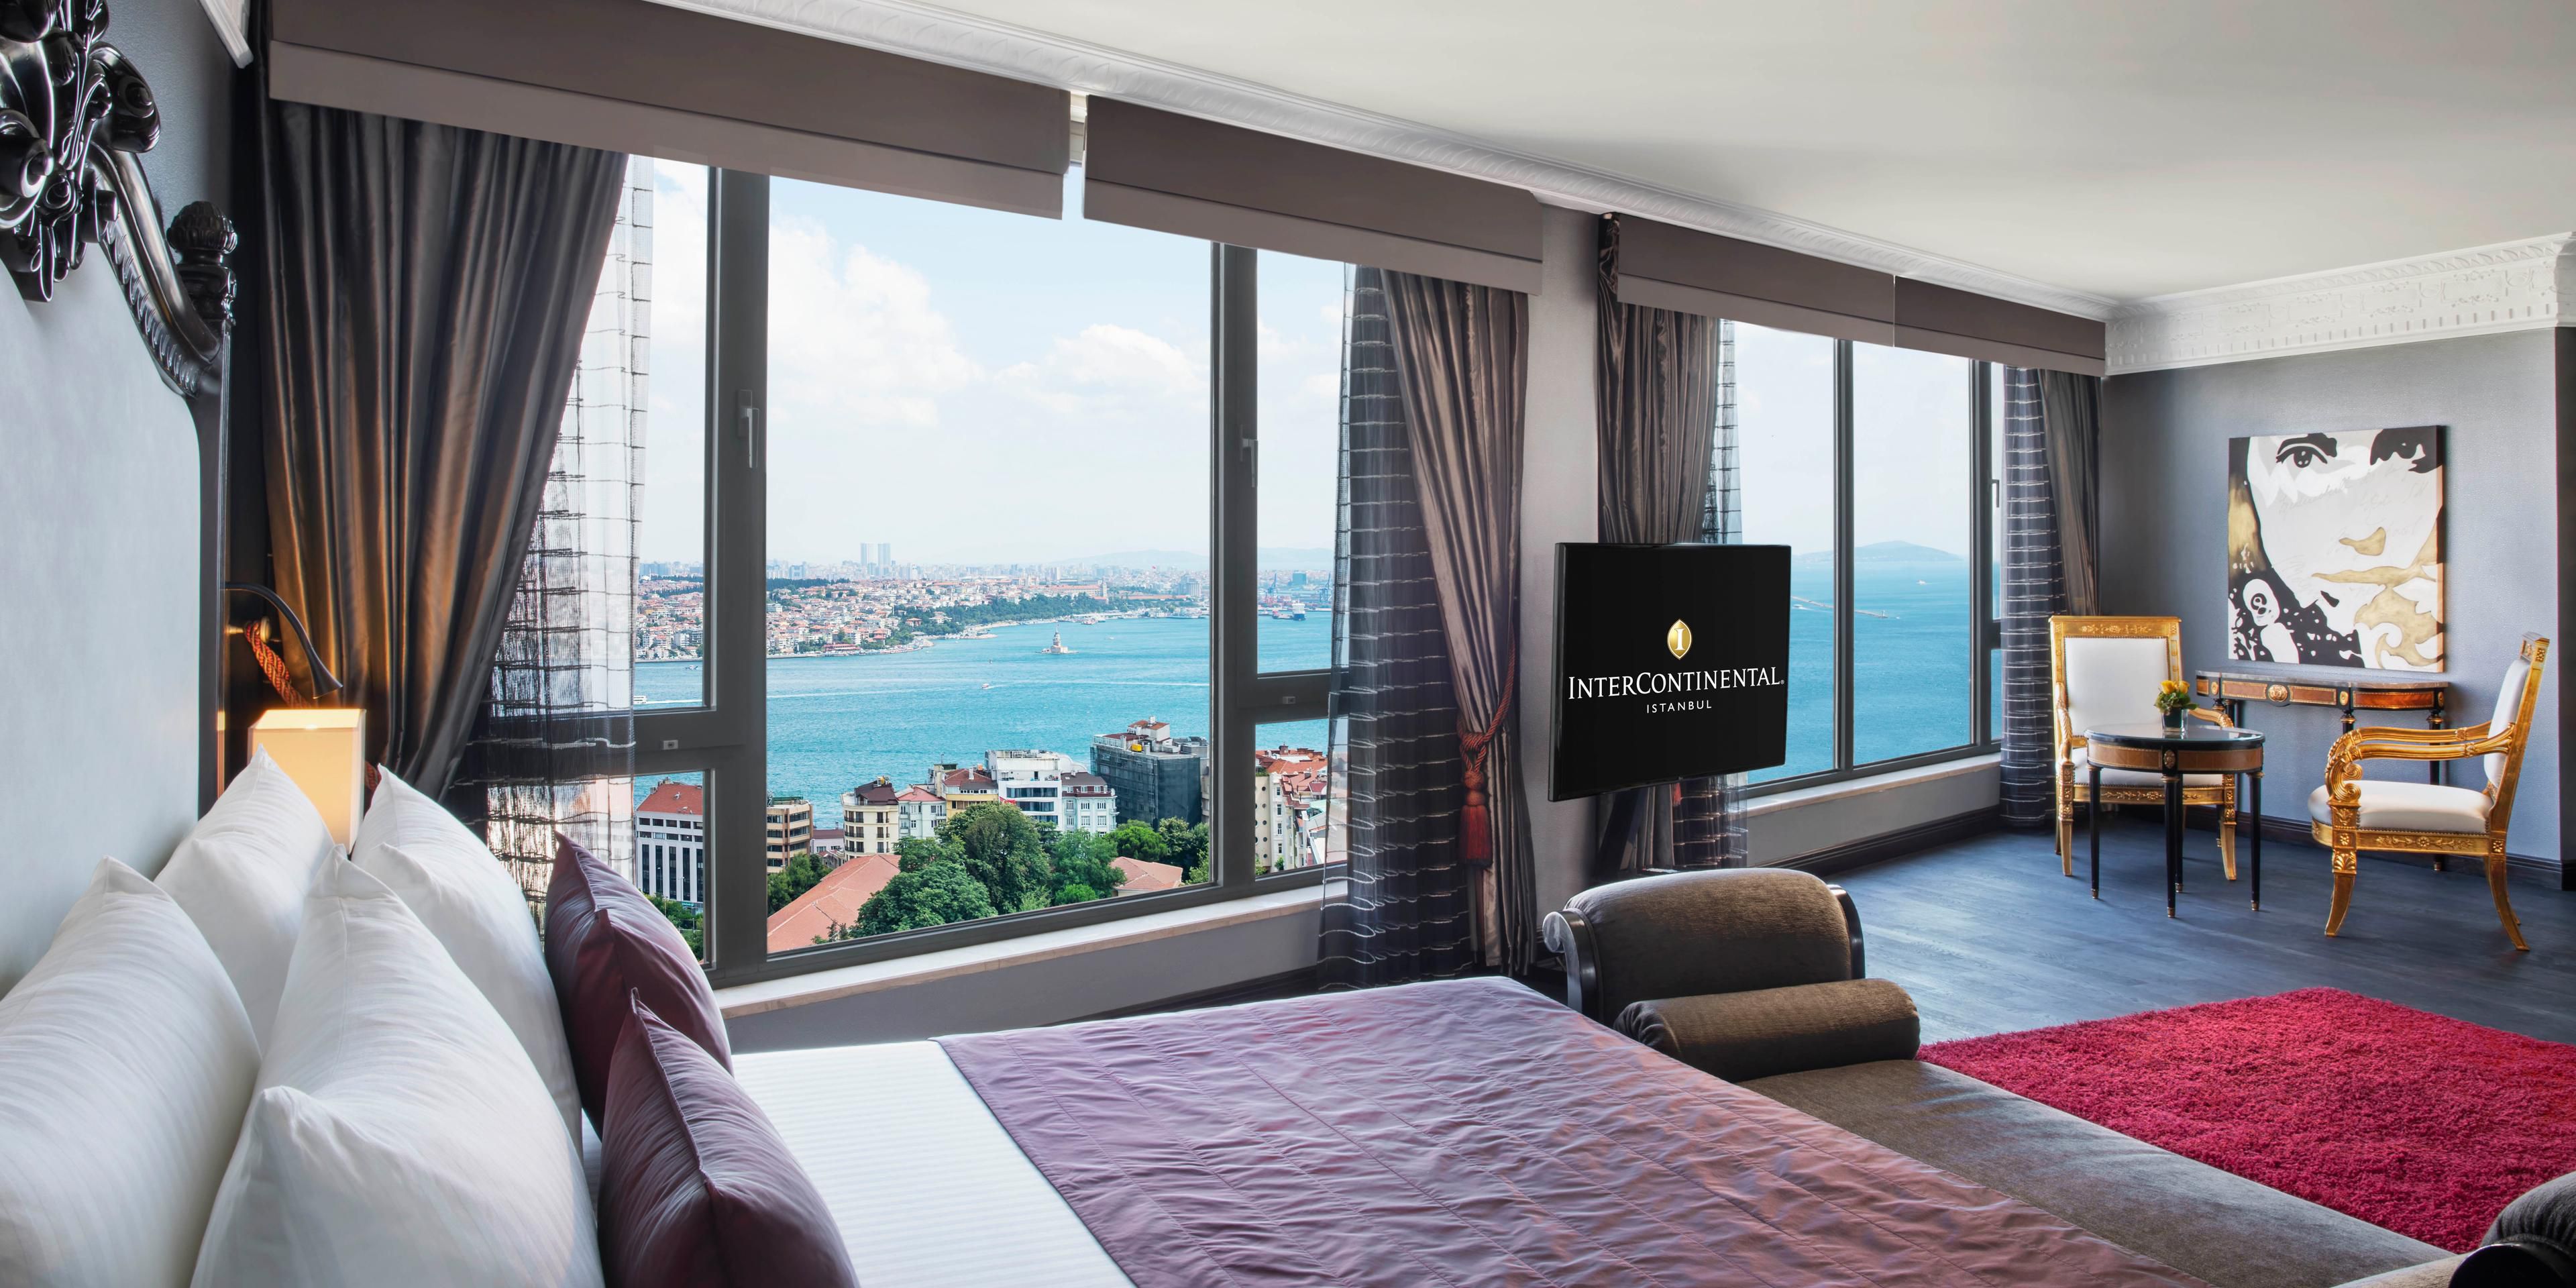 Voted Best Suite in Turkey by the World Travel Awards, our Concept Suite offers smart design and breathtaking views. Experience exceptional accommodations at one of our exquisite suites. 